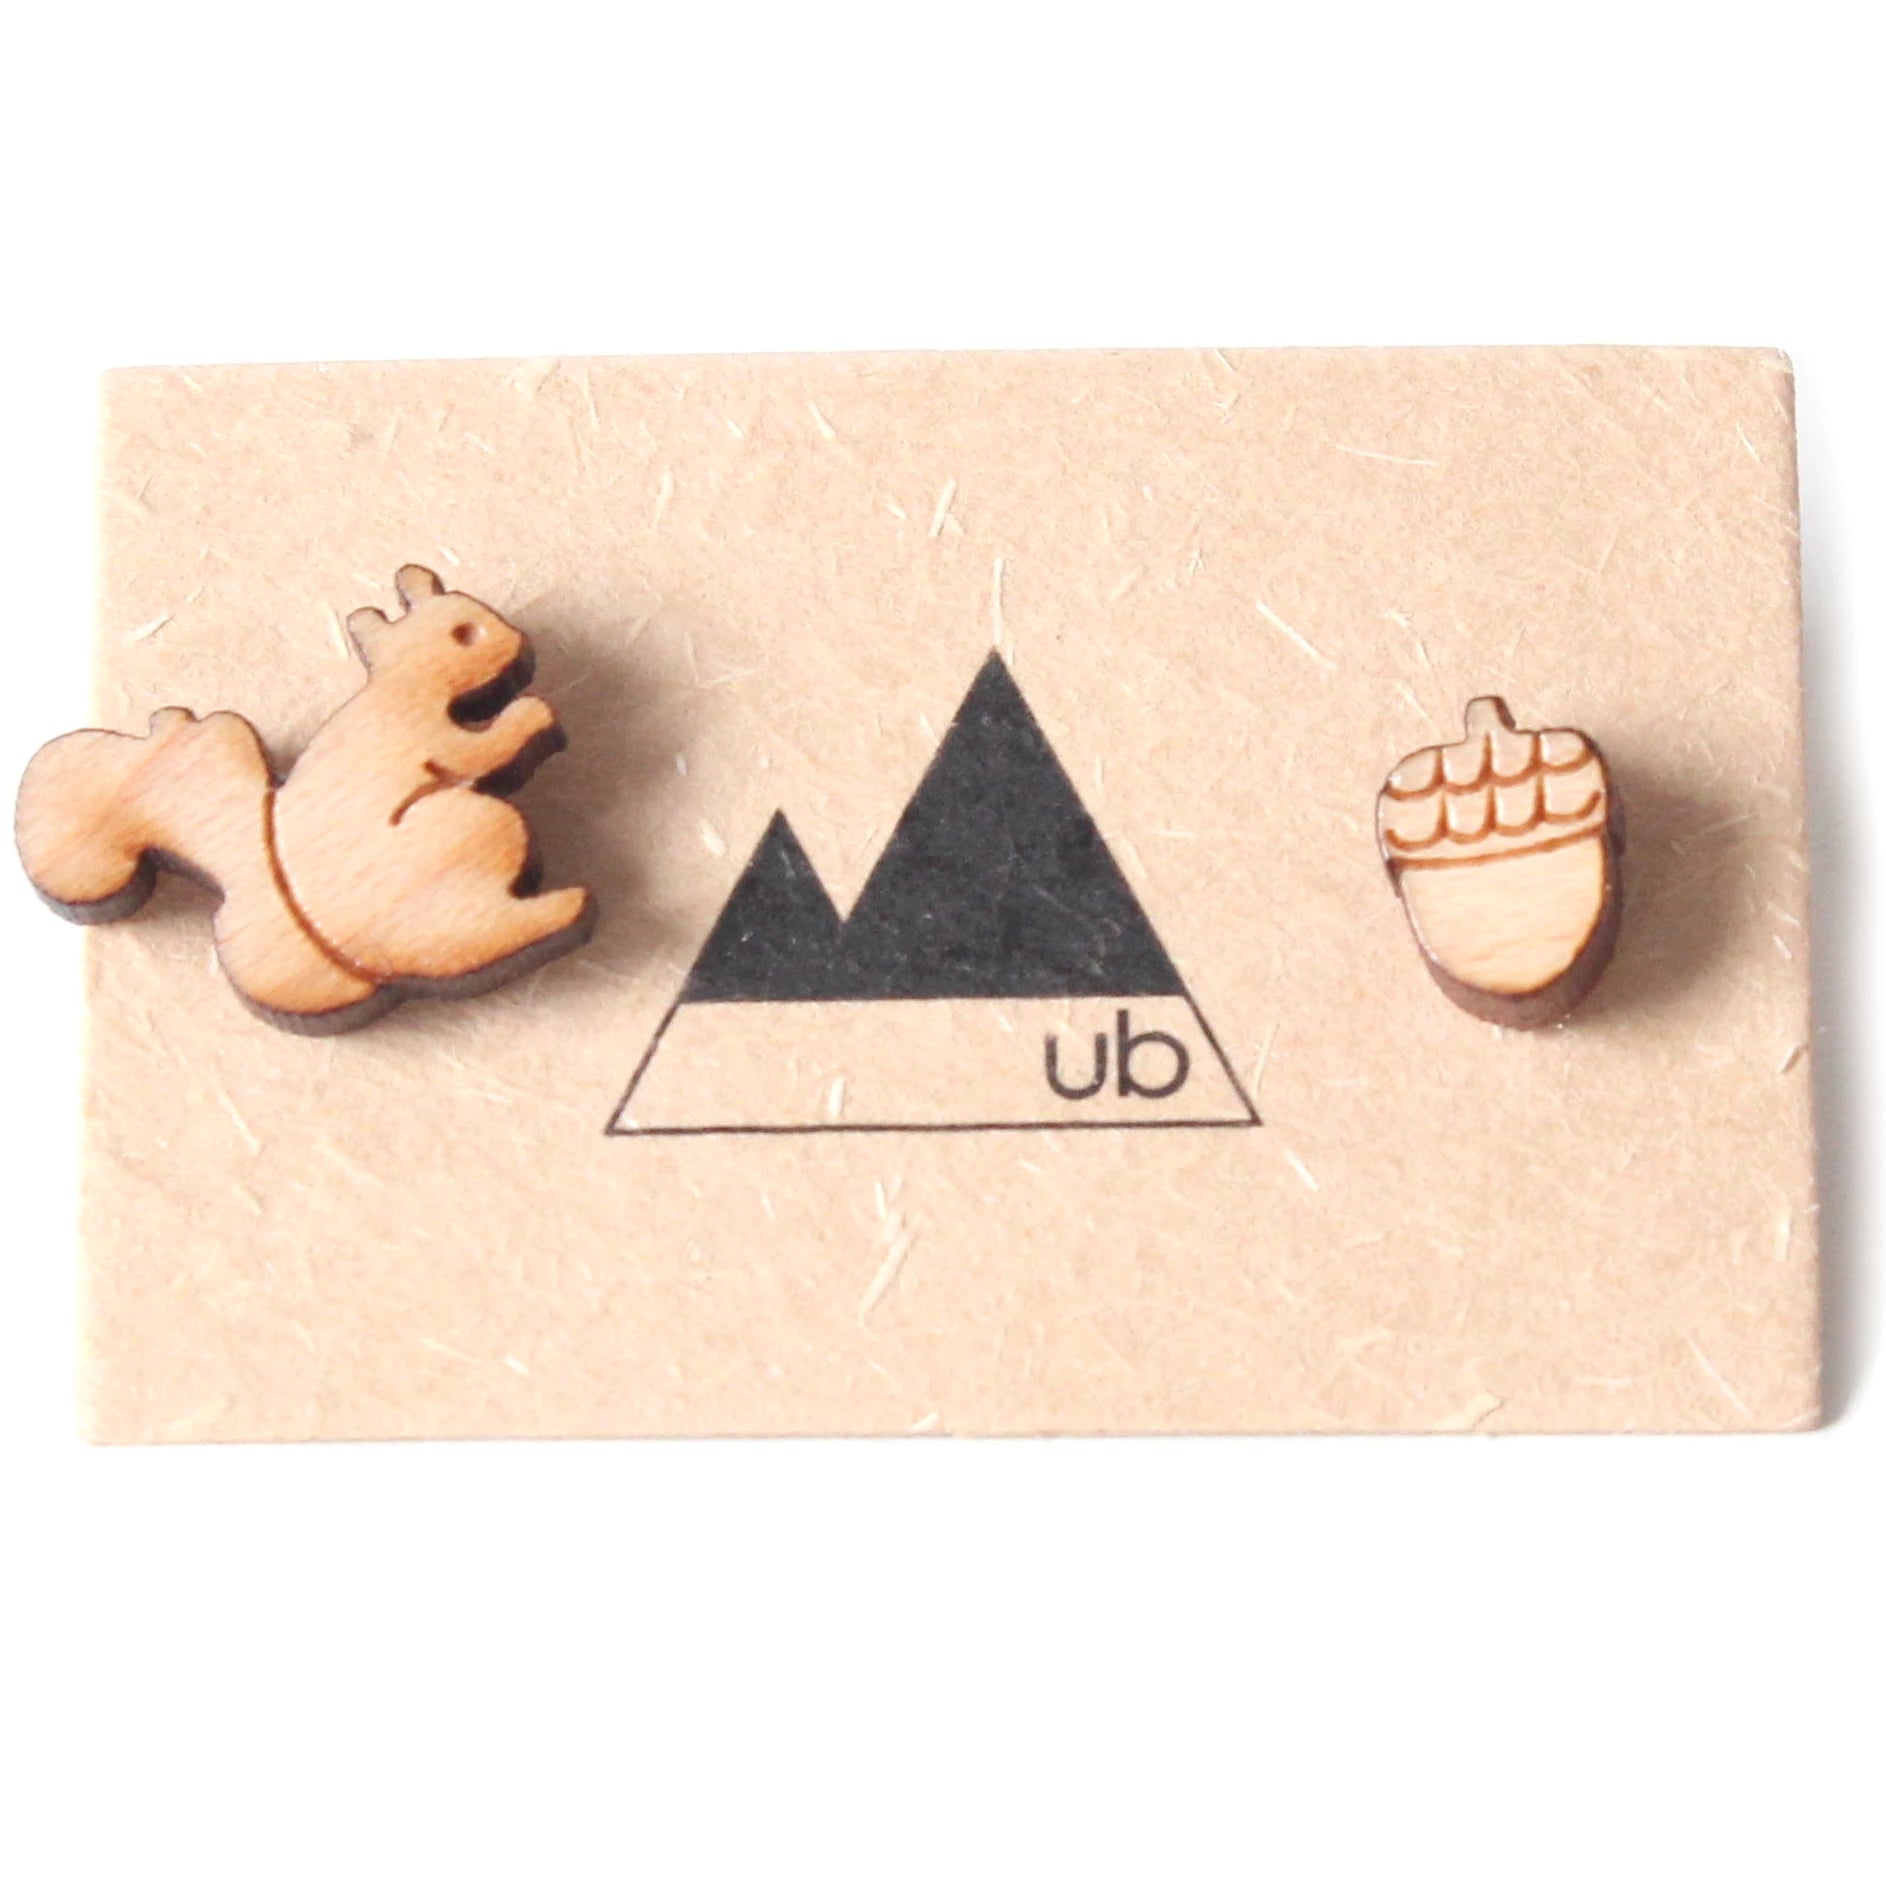 Made in Canada wood stud mismatch earrings with laser cut squirrel and acorn.